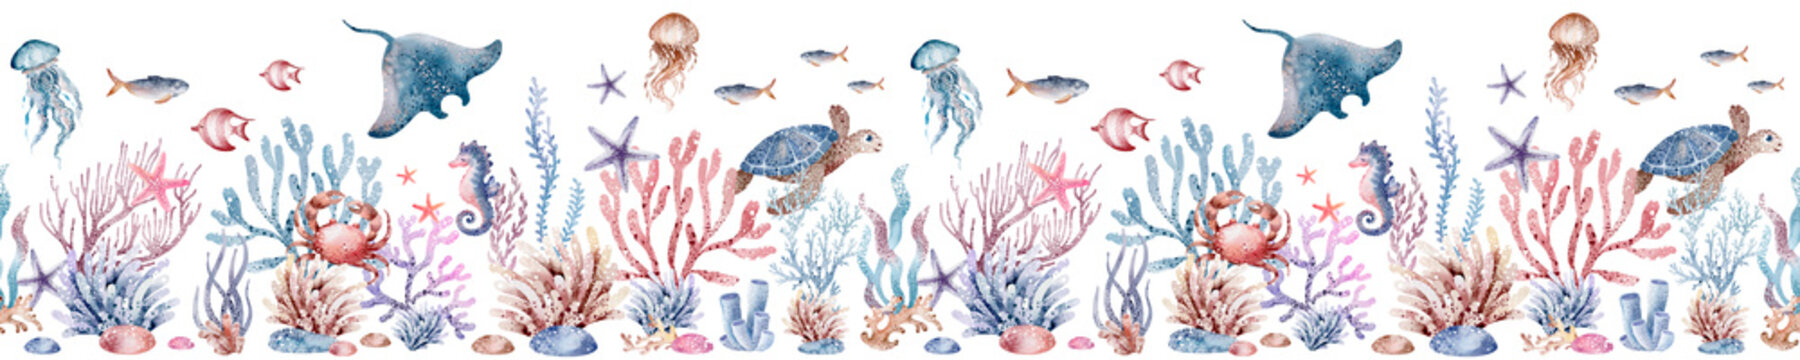 Sea animals seamless border. Hand drawn watercolor illustration of underwater world ornament on isolated background. Sea corals and shells for banner.